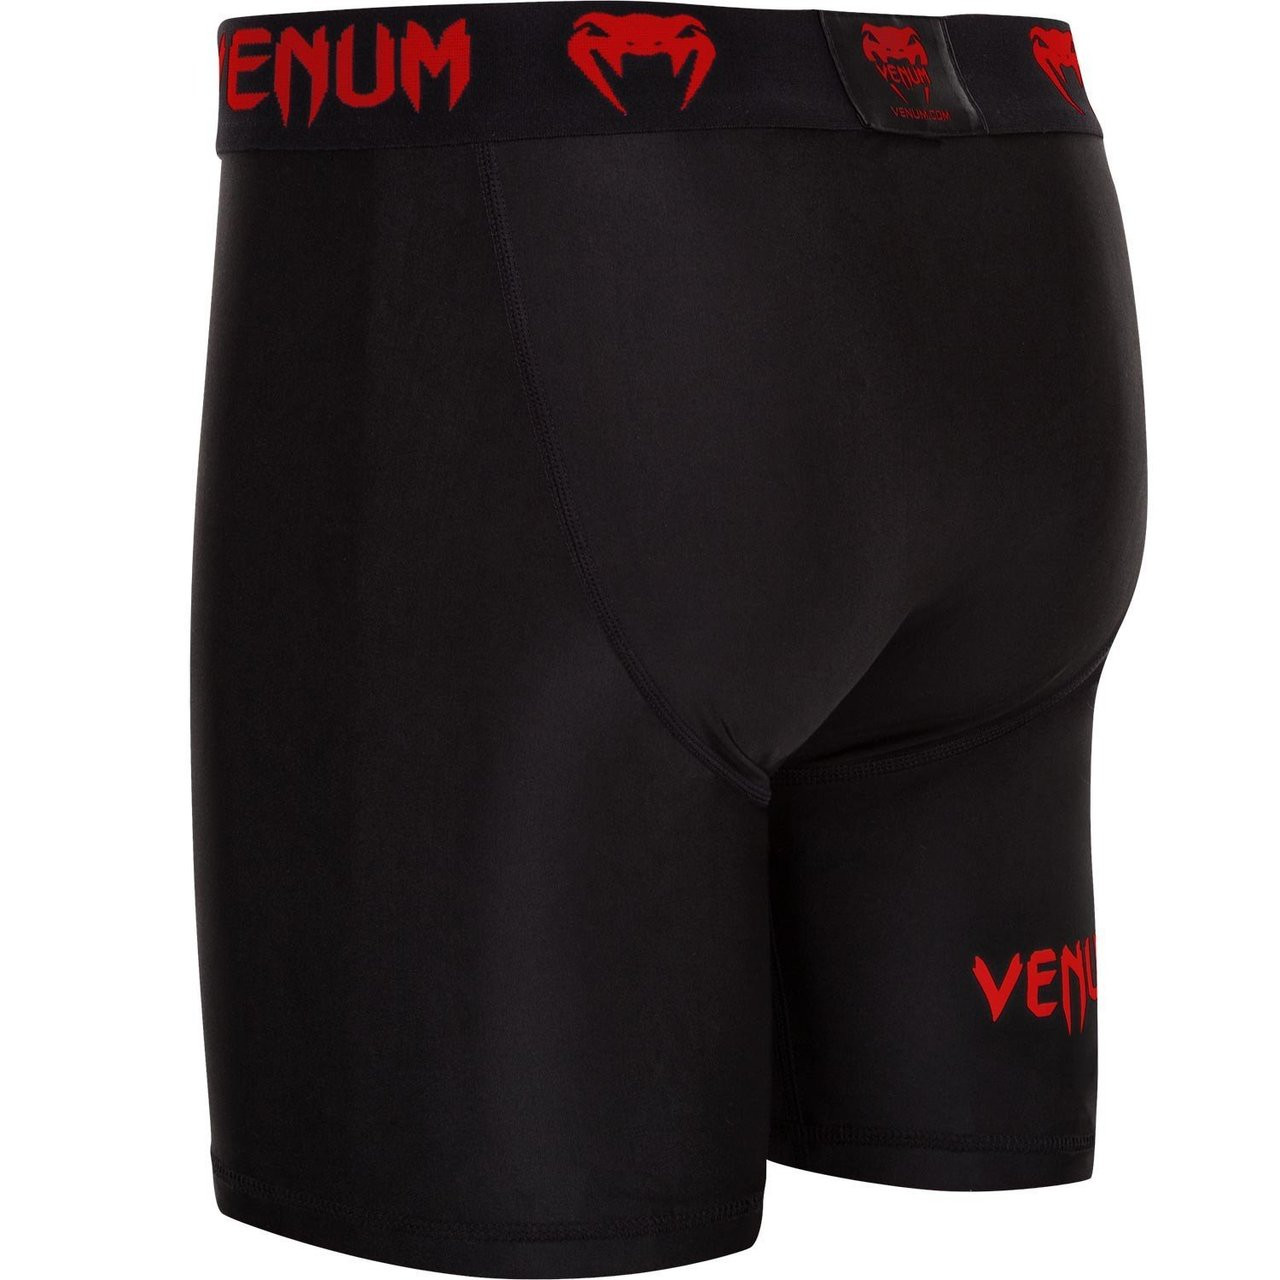 Venum Compression Contender 2.0 Shorts Black Red now available at www.thejiujitsushop.com

Enjoy Free Shipping today! 